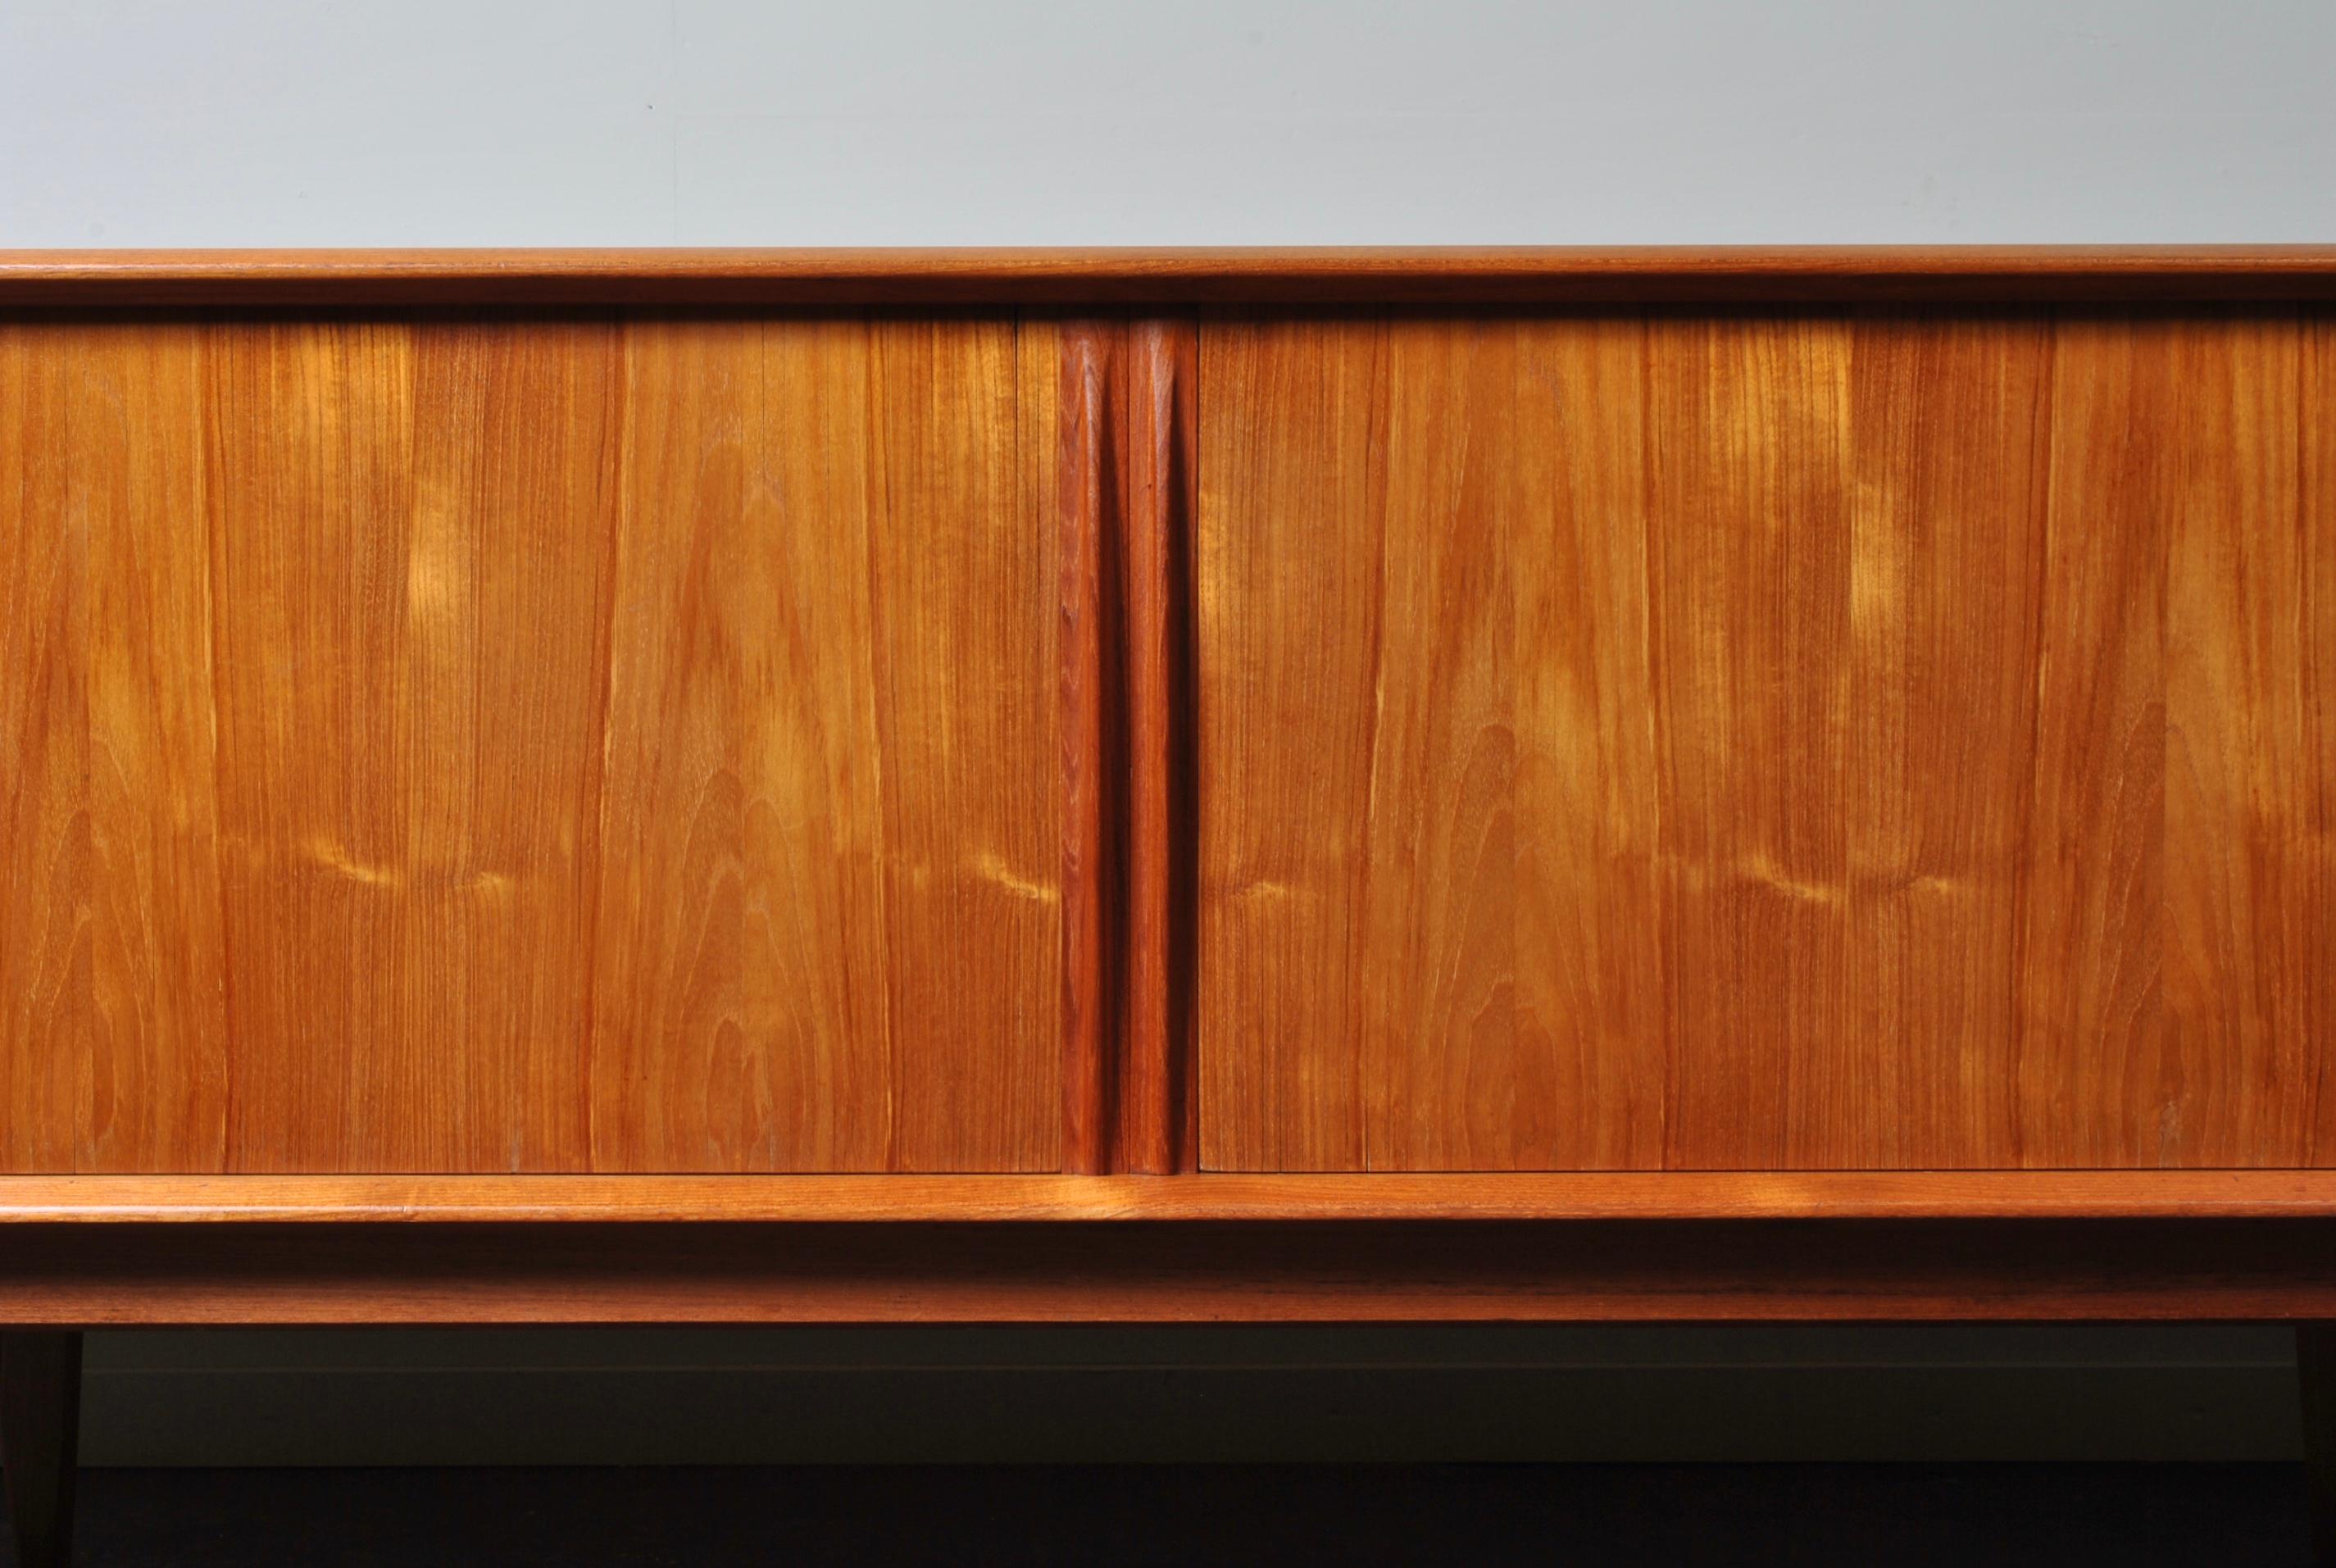 Large Danish midcentury teak sideboard or credenza. Tambour door front with 4 internal central drawers and adjustable shelves either side. Produced in Denmark circa 1960 by Bernhard Pedersen.
Wonderfully simple modernist design. Smooth sliding